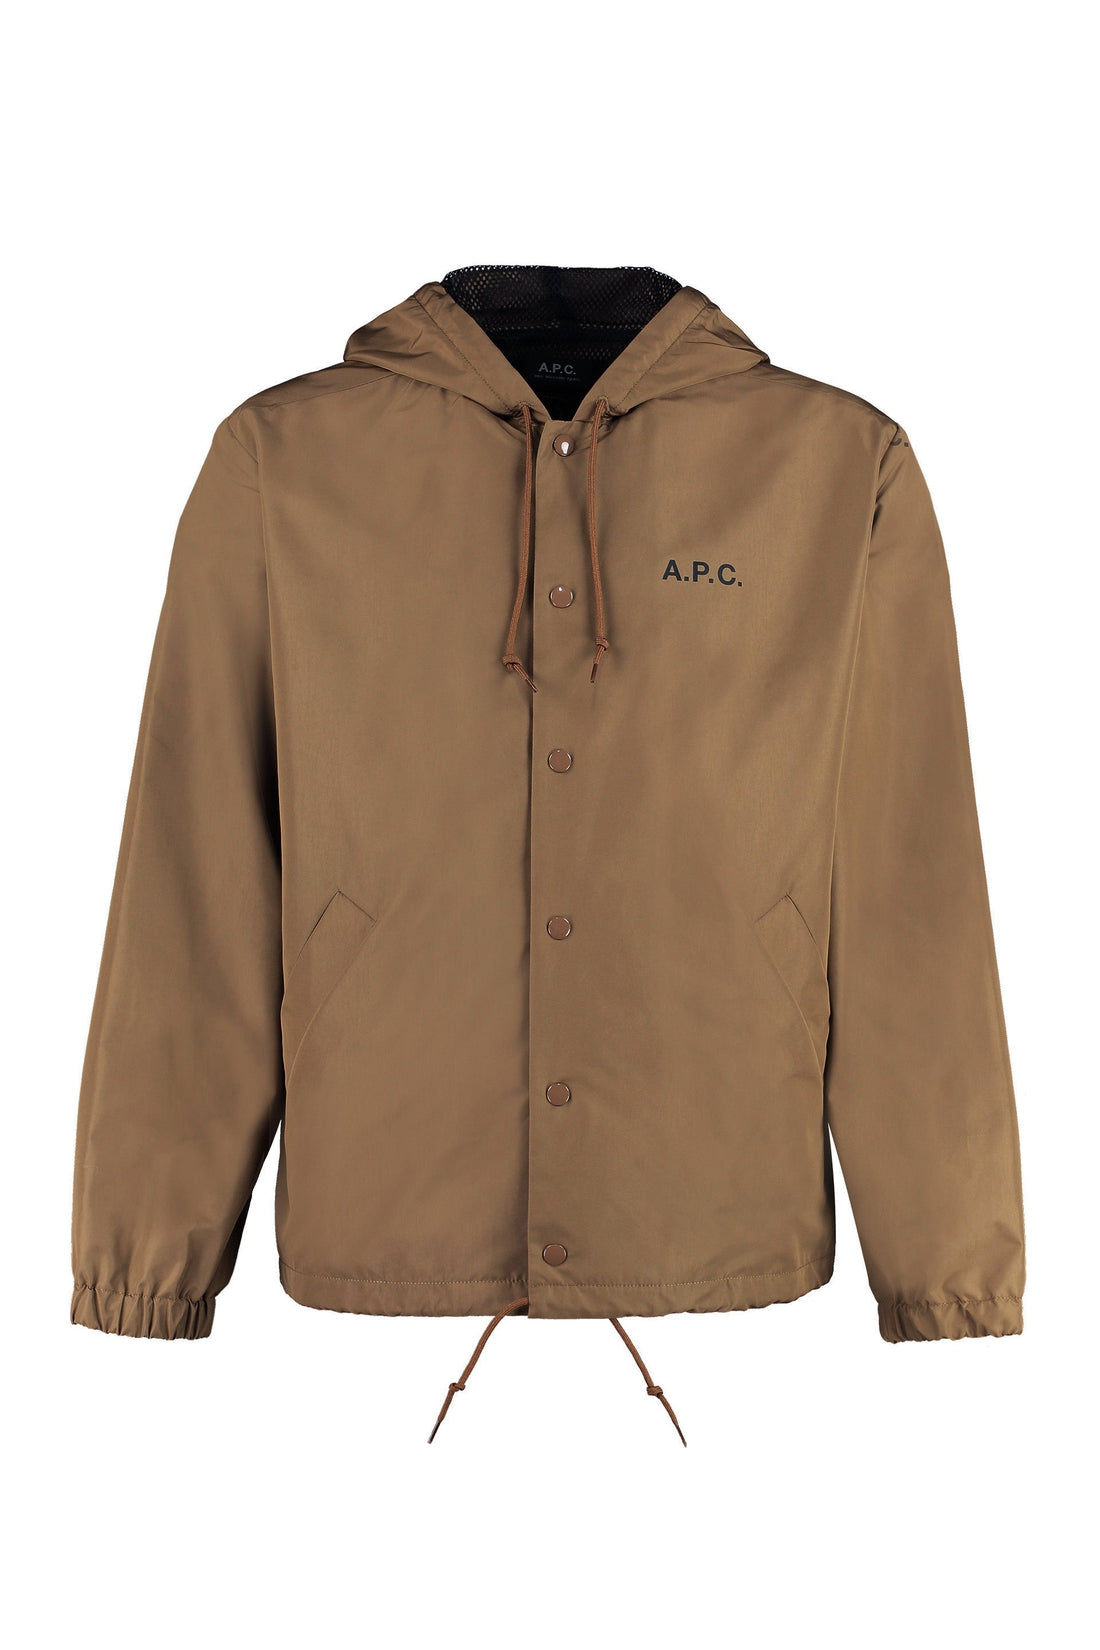 A.P.C.-OUTLET-SALE-Hooded windbreaker-ARCHIVIST